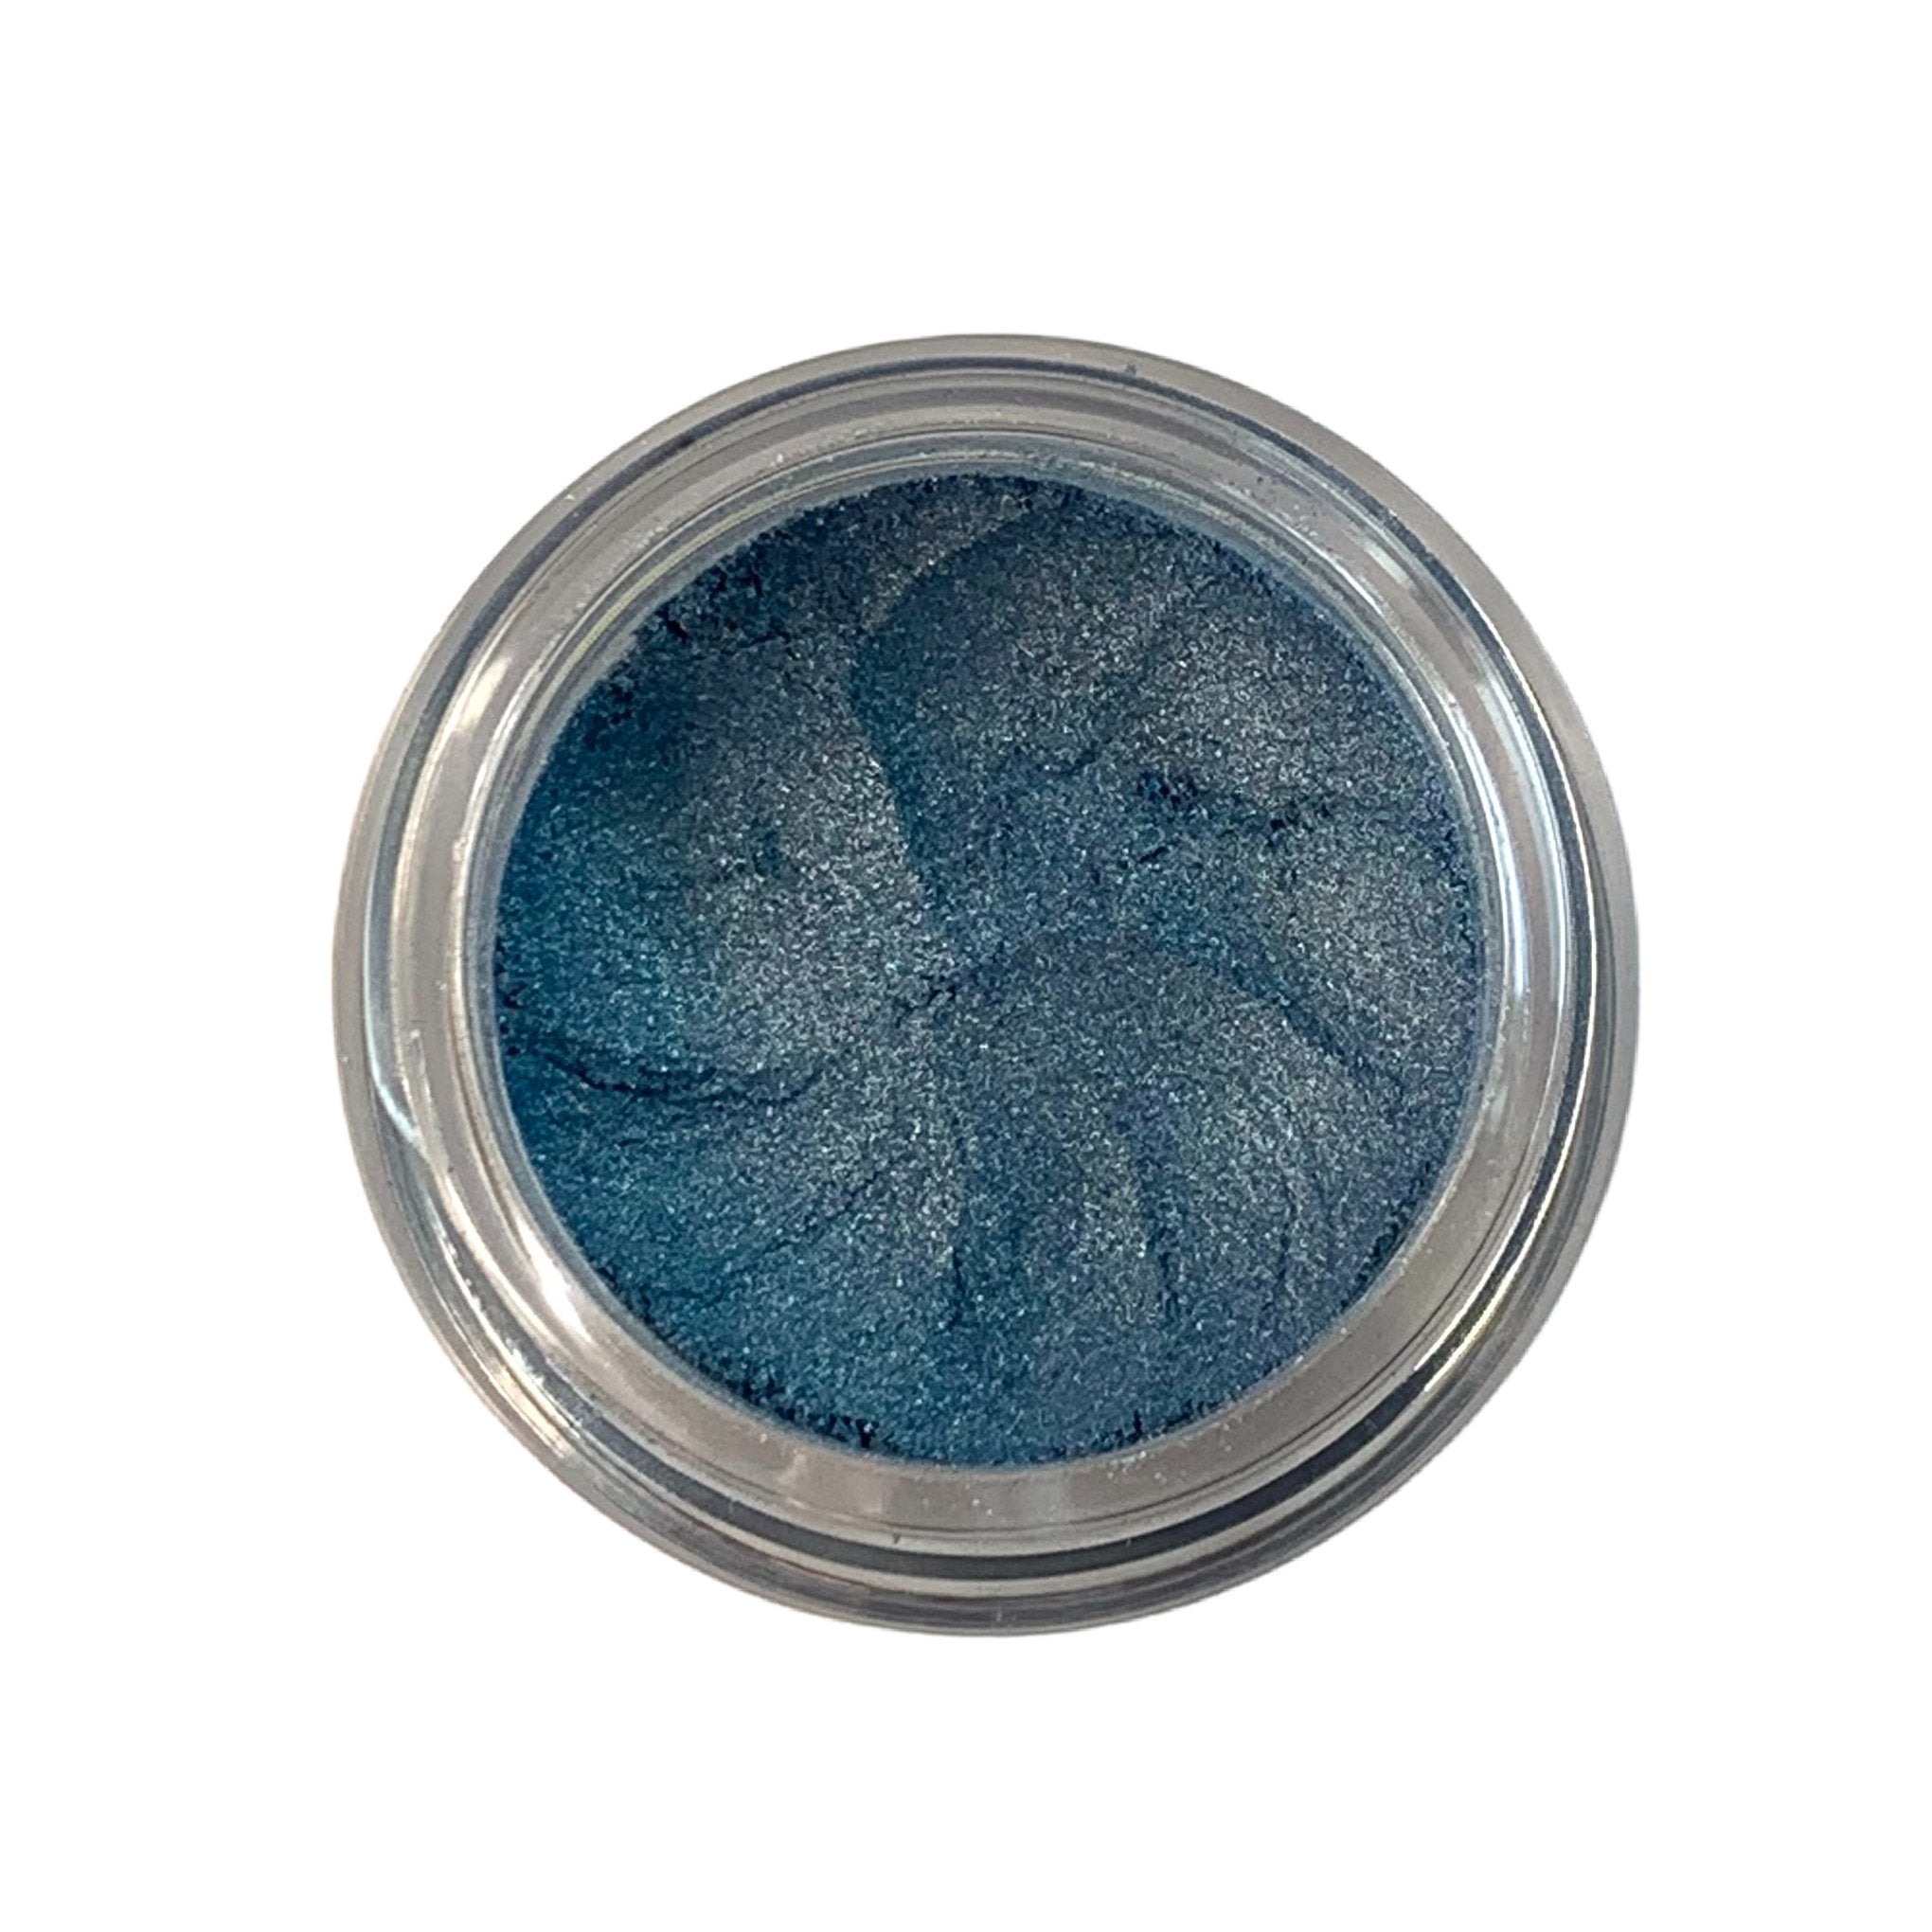 dreams - a soft blue grey loose mineral eyeshadow. comes in a 10gram sifter jar, vegan and cruelty free.